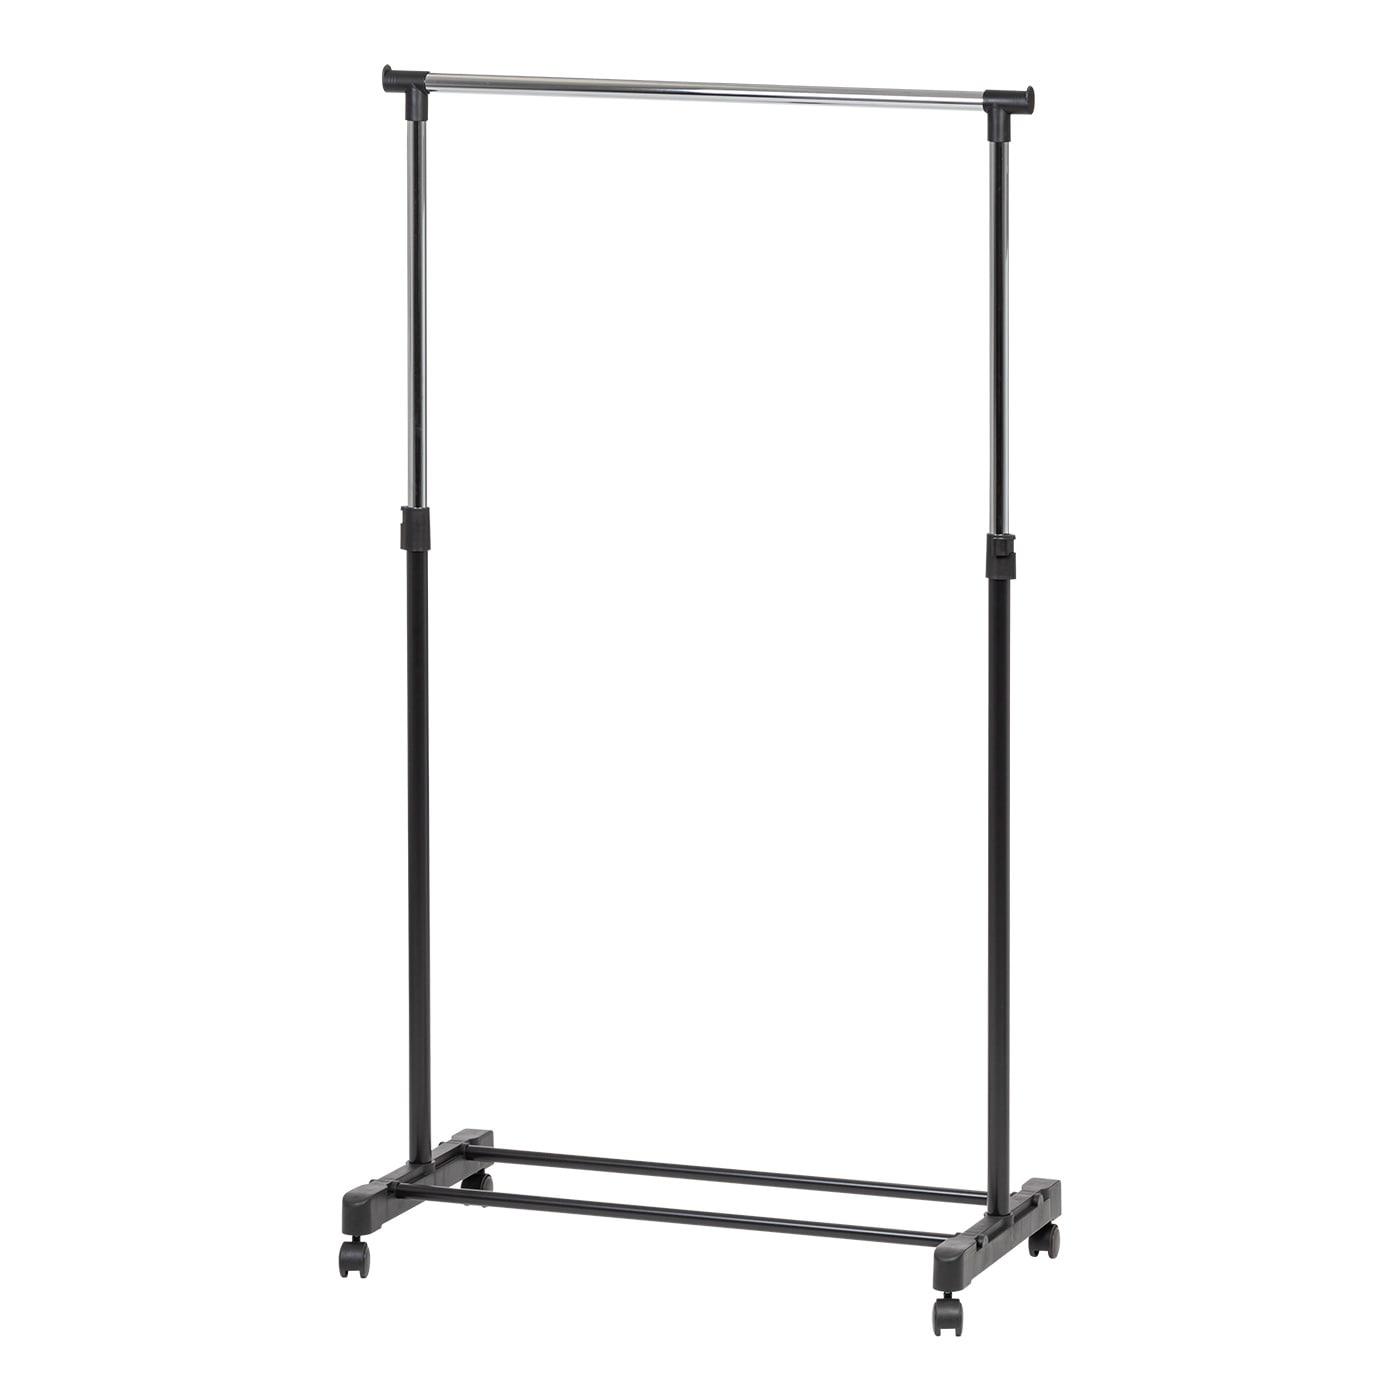 LEOPAX Heavy Duty Clothing Garment Rack, Freestanding Clothing Rack,  Portable Closet Wardrobe with 3 shelves 2 Side Handle and 2 Clothe Rod for